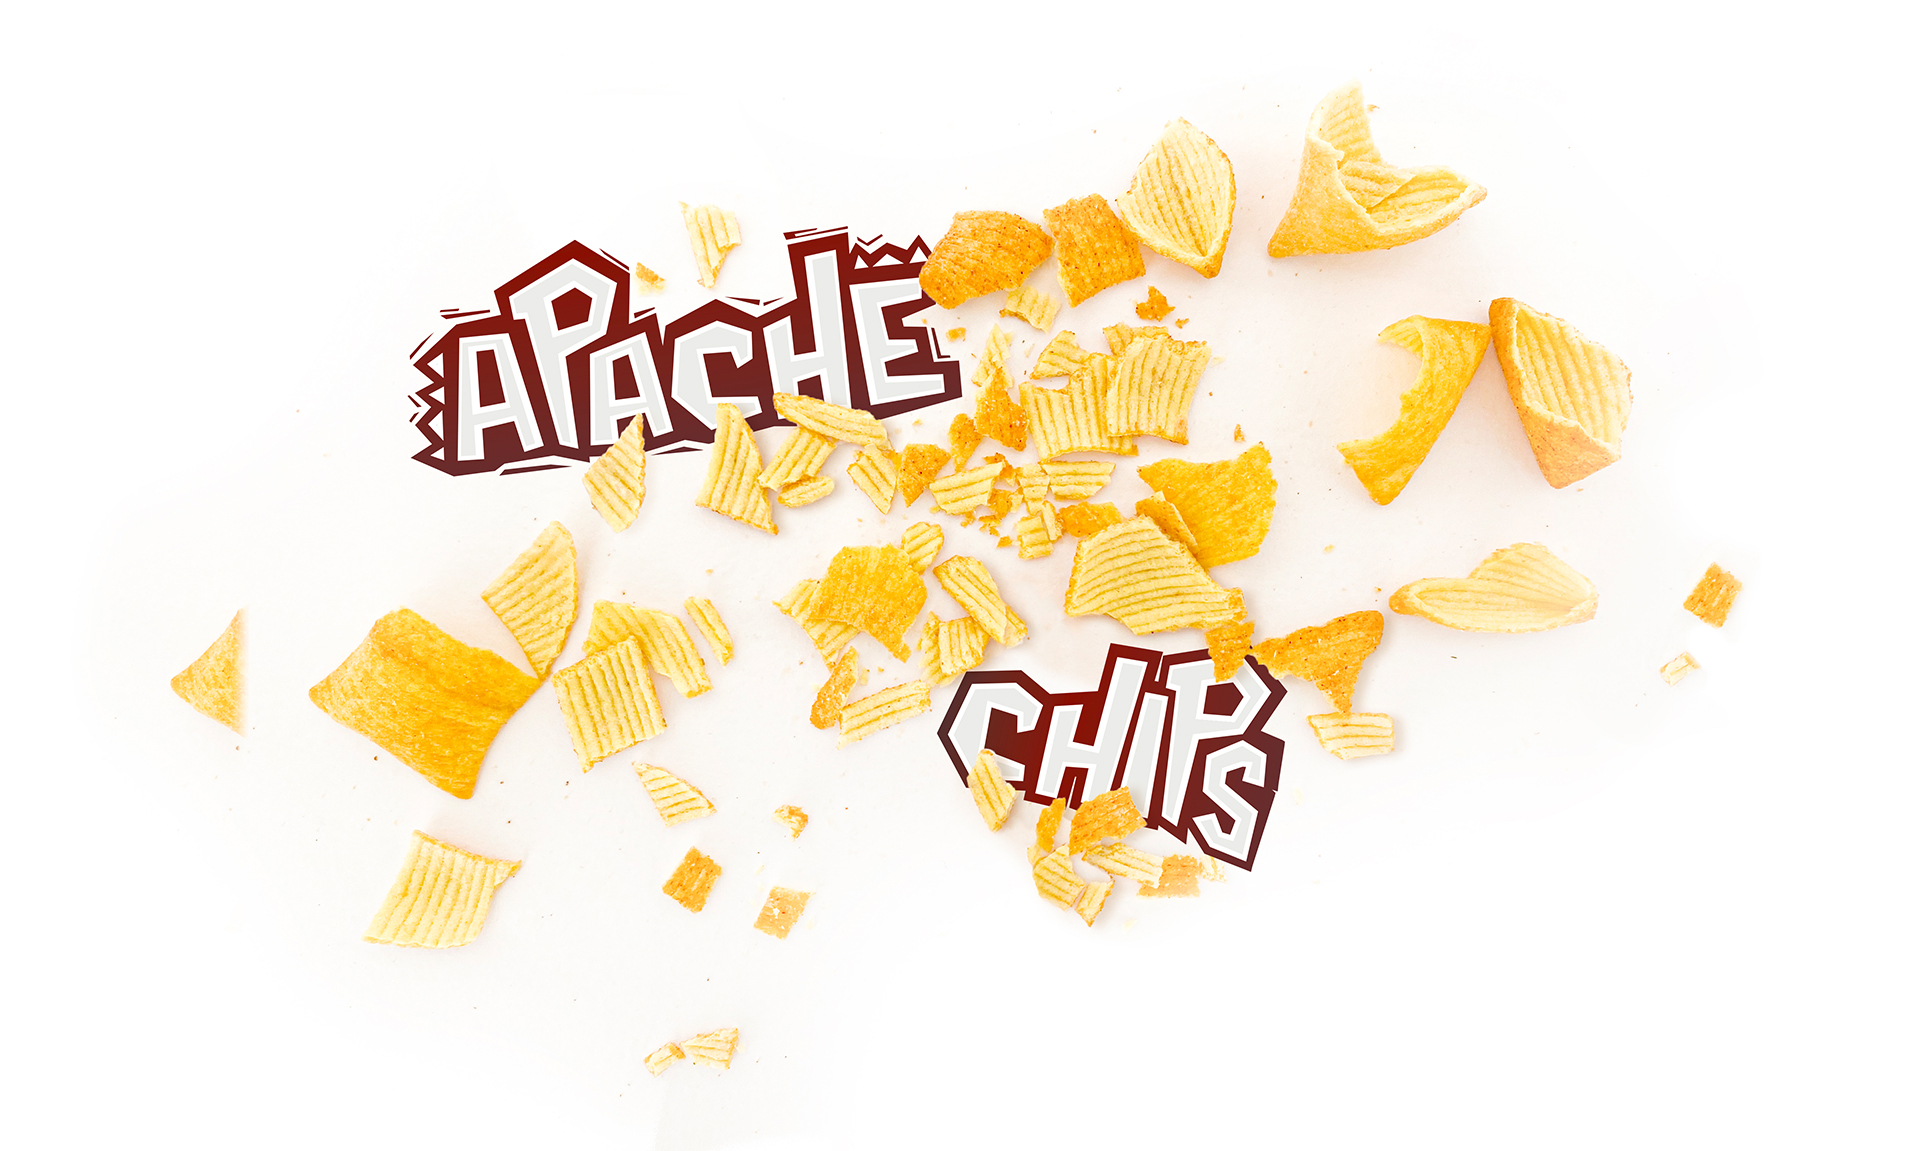 Apache Chips